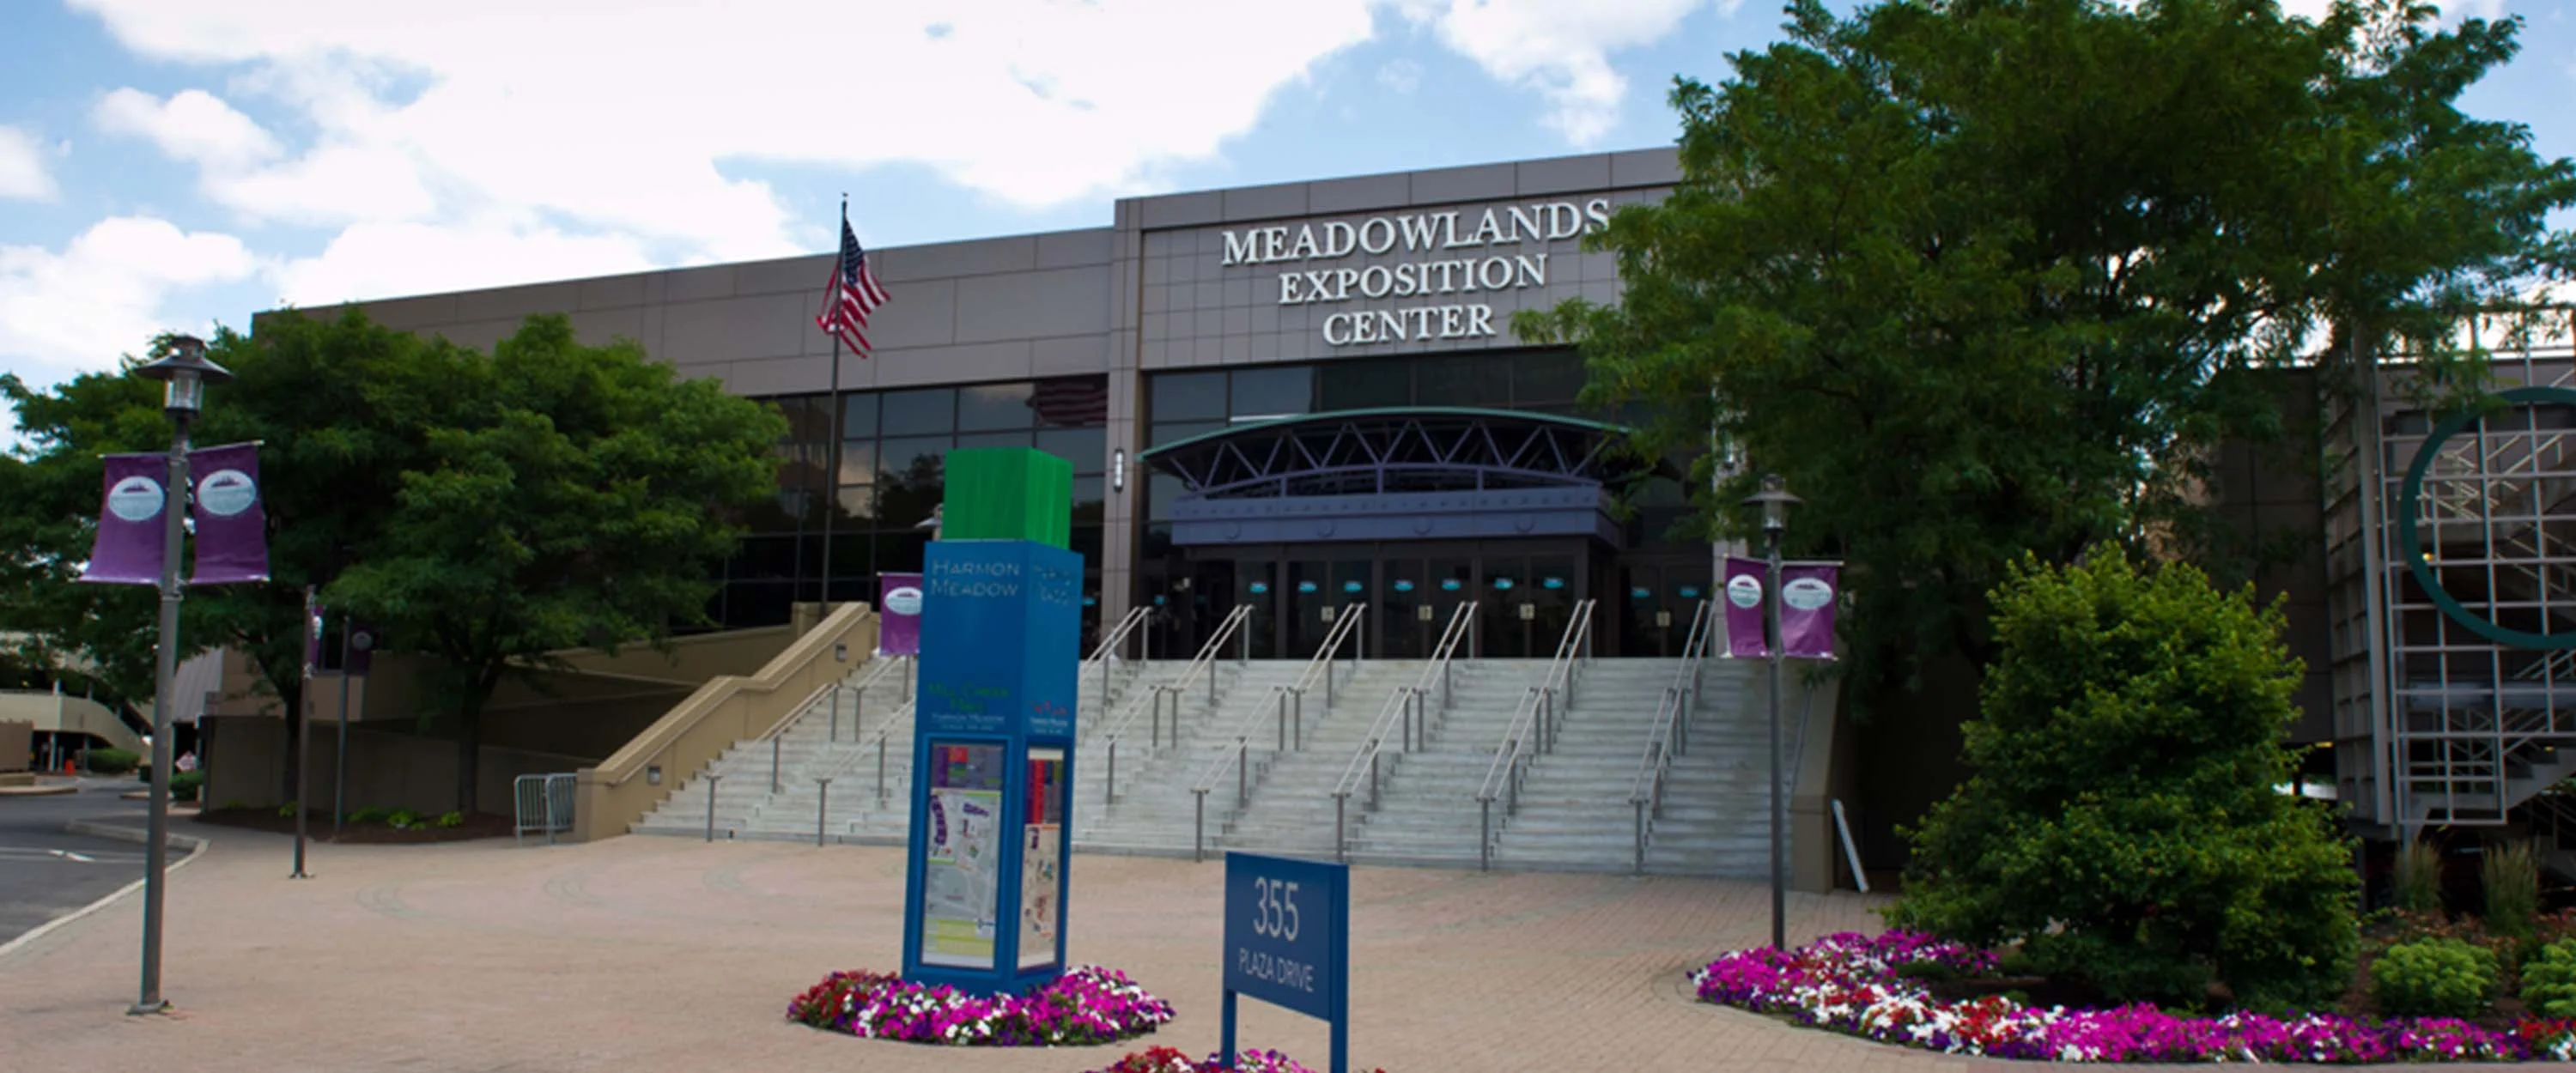 Meadowlands Expo Centre, New Jersey